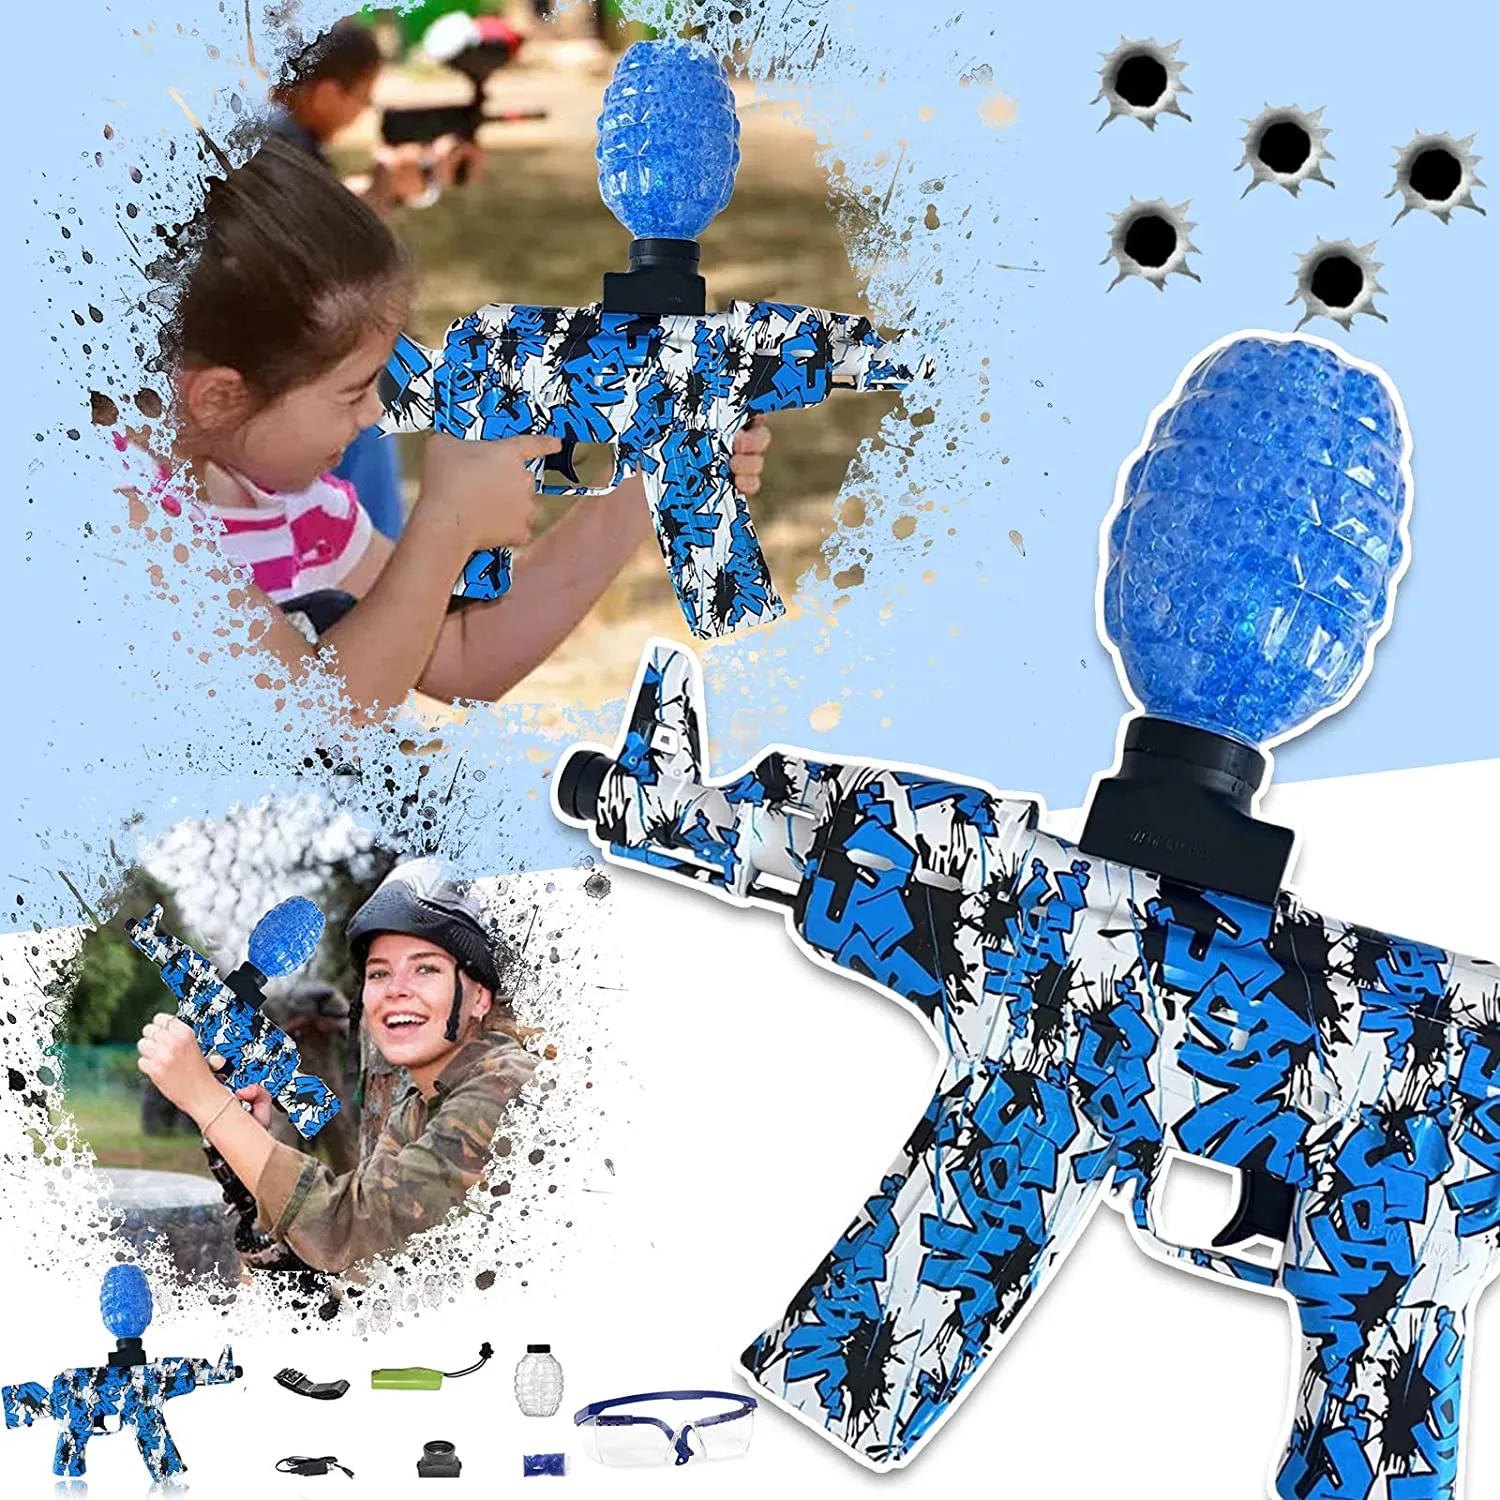 AK47 Gel Electric Blaster Éco-Splatter Paintball Airsoft Orbeez Gun Automatic Water Beads Shooter For Children Gift